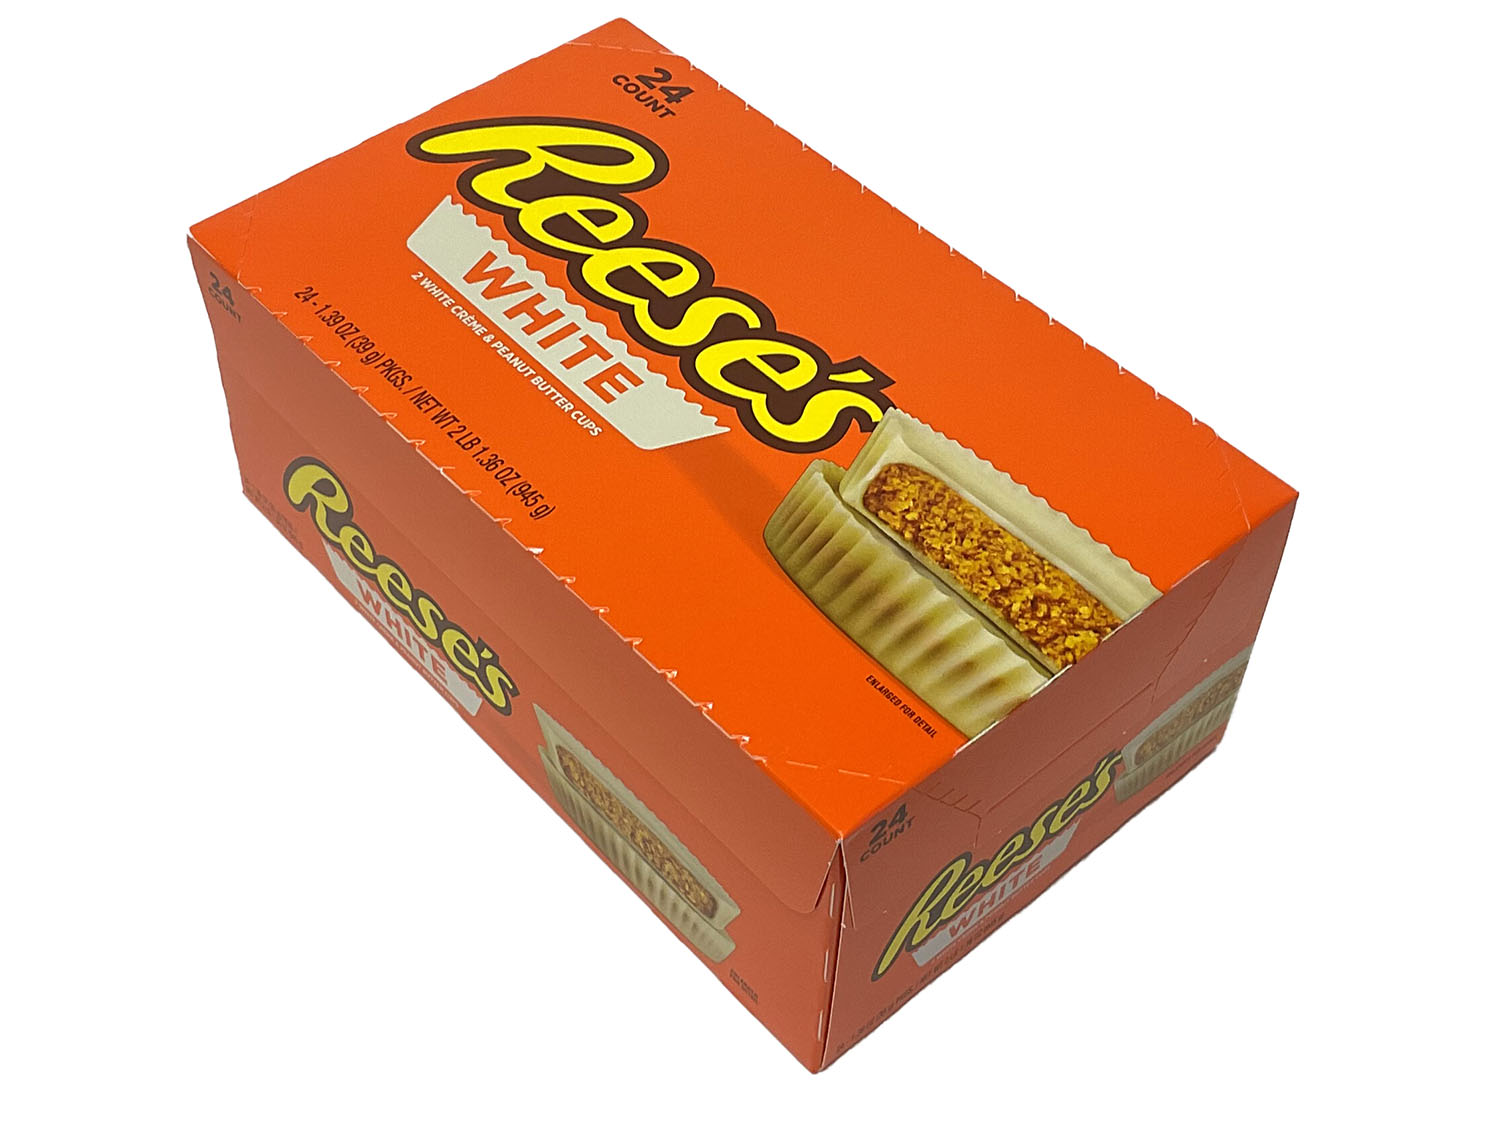 Reese's Peanut Butter Cups White Creme - 1.39 oz Pack - box of 24